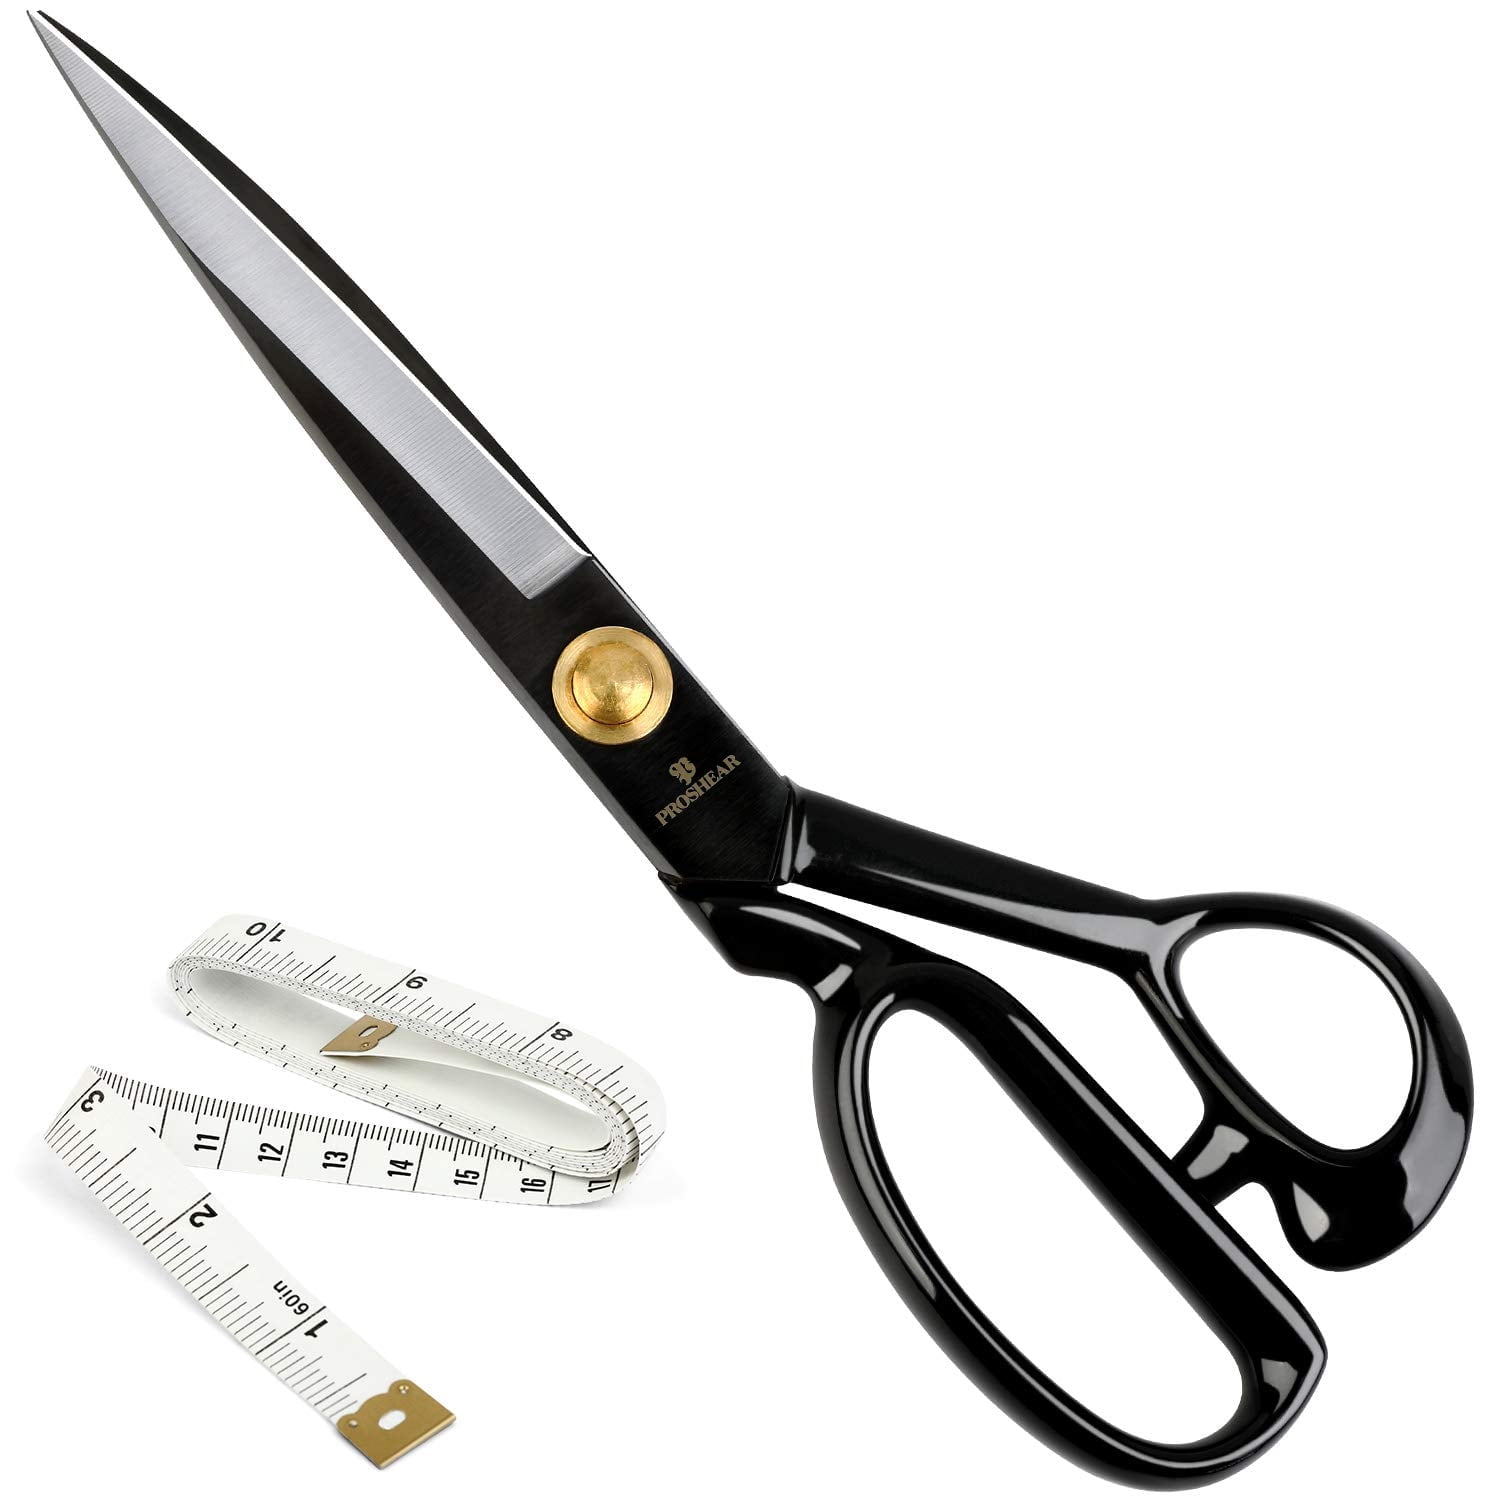 Proshear Fabric Scissors Professional 10 inch Heavy Duty Scissors for Leather Sewing Shears for Tailoring Indu